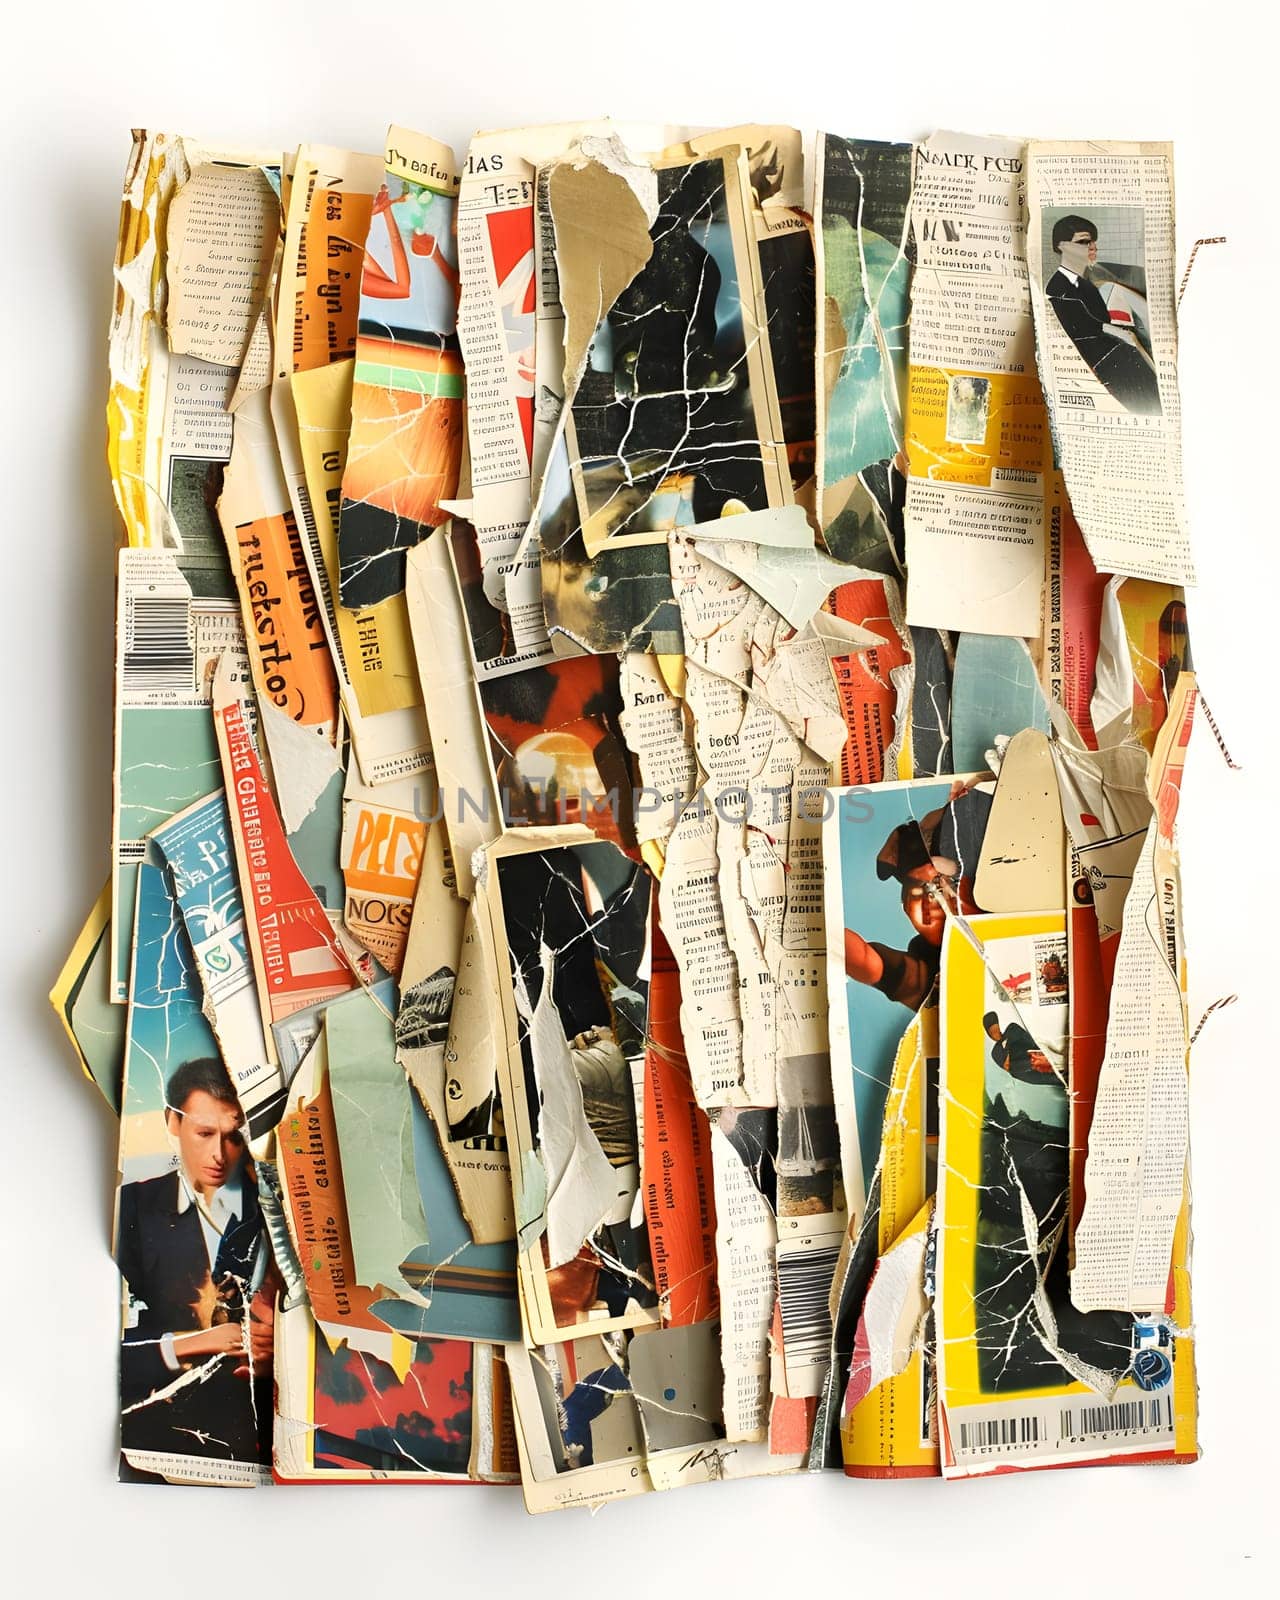 Vintage collage featuring a man in tuxedo amidst old magazines and newspapers by Nadtochiy